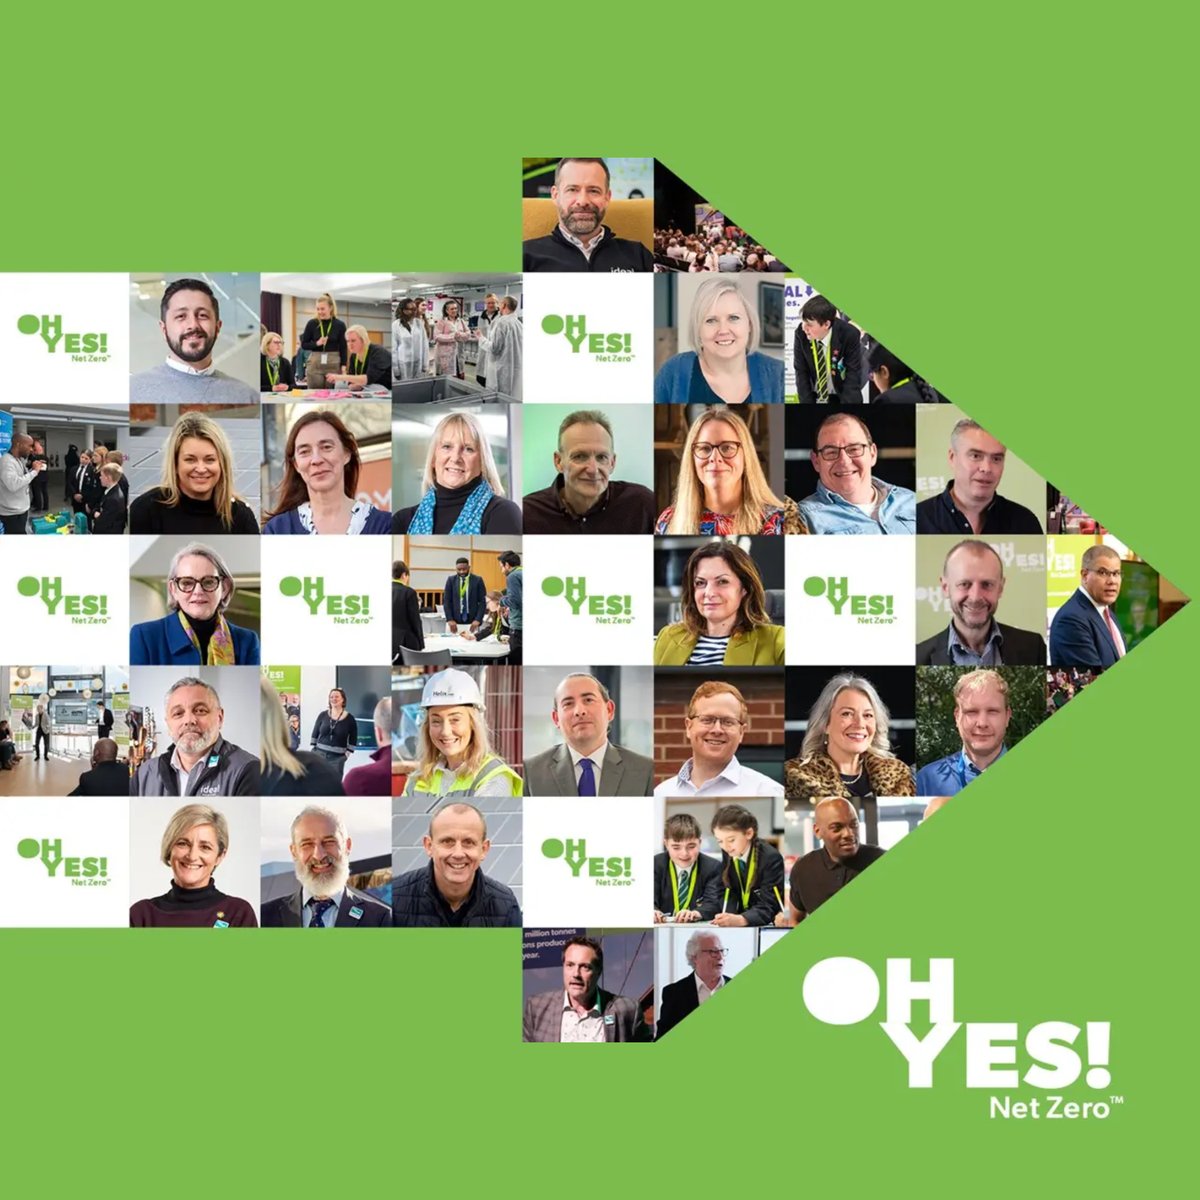 It's been two years since the launch of the @OhYesNetZero movement. We've proudly played a part in the scheme to help decarbonise our region - reducing the emissions generated by the 2023 festival by 90% compared to 2022 👉 bit.ly/HSSOhYesNetZero 👀 reckitt.com/oh-yes-net-zer…